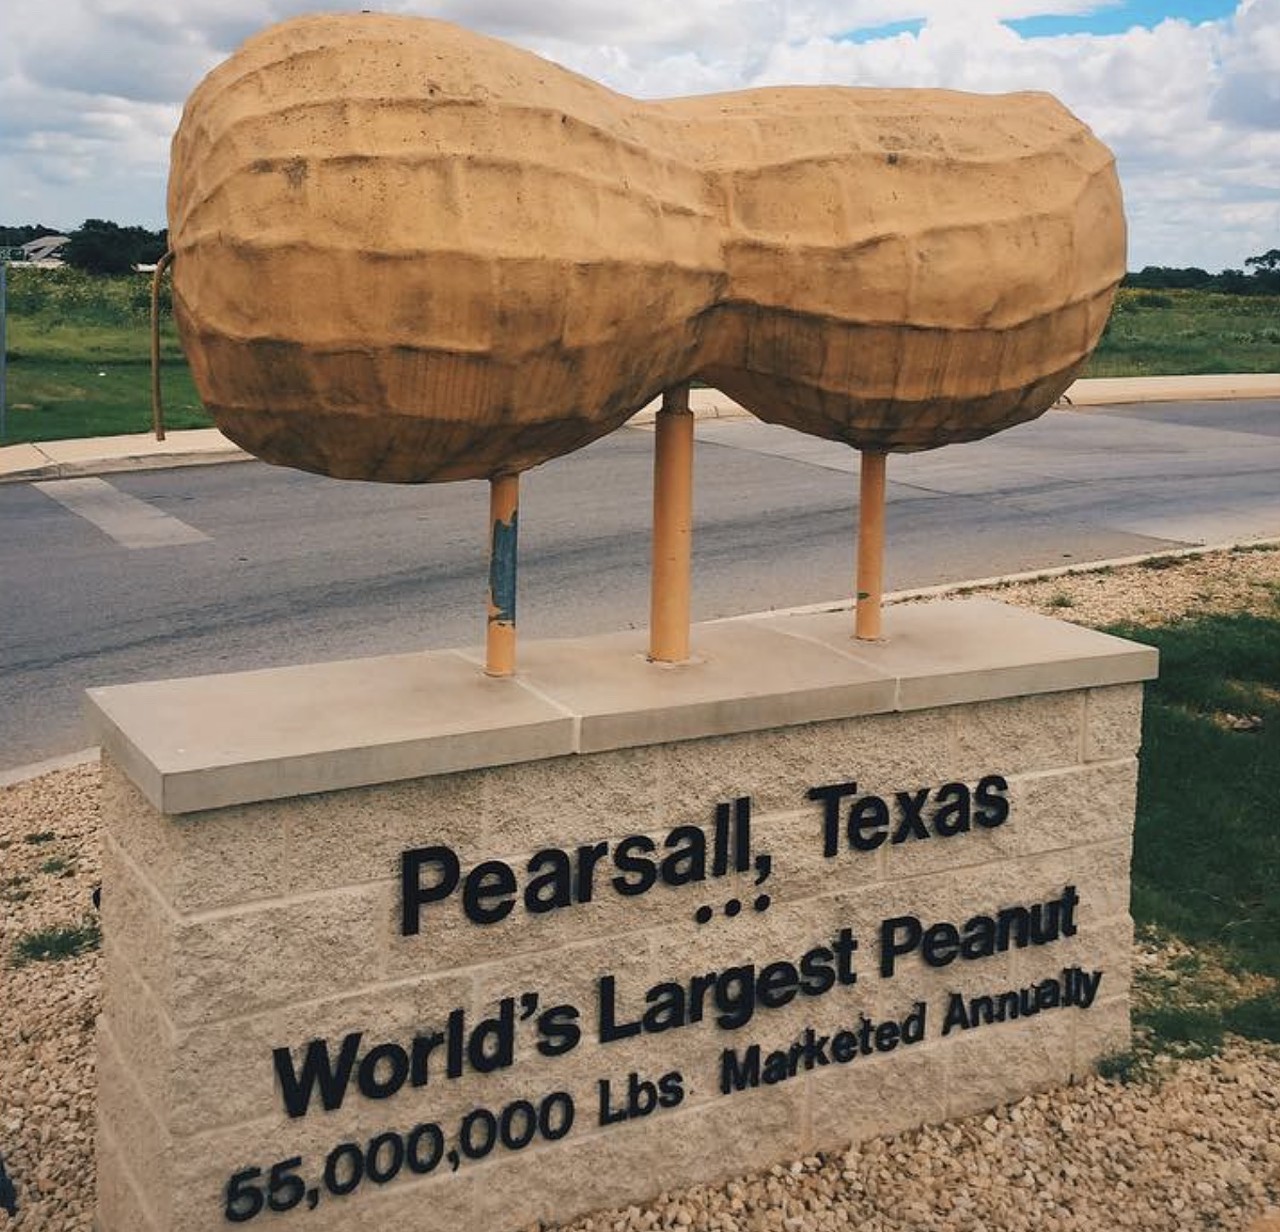 World’s Largest Peanut, Pearsall
Junction of S. Treviño St. and Comal St., Pearsall, roadsideamerica.com
The World’s Largest Peanut still stands proudly after over 25 years on the side of the road in Pearsall, TX. 
Photo via Instagram /  redfangoo